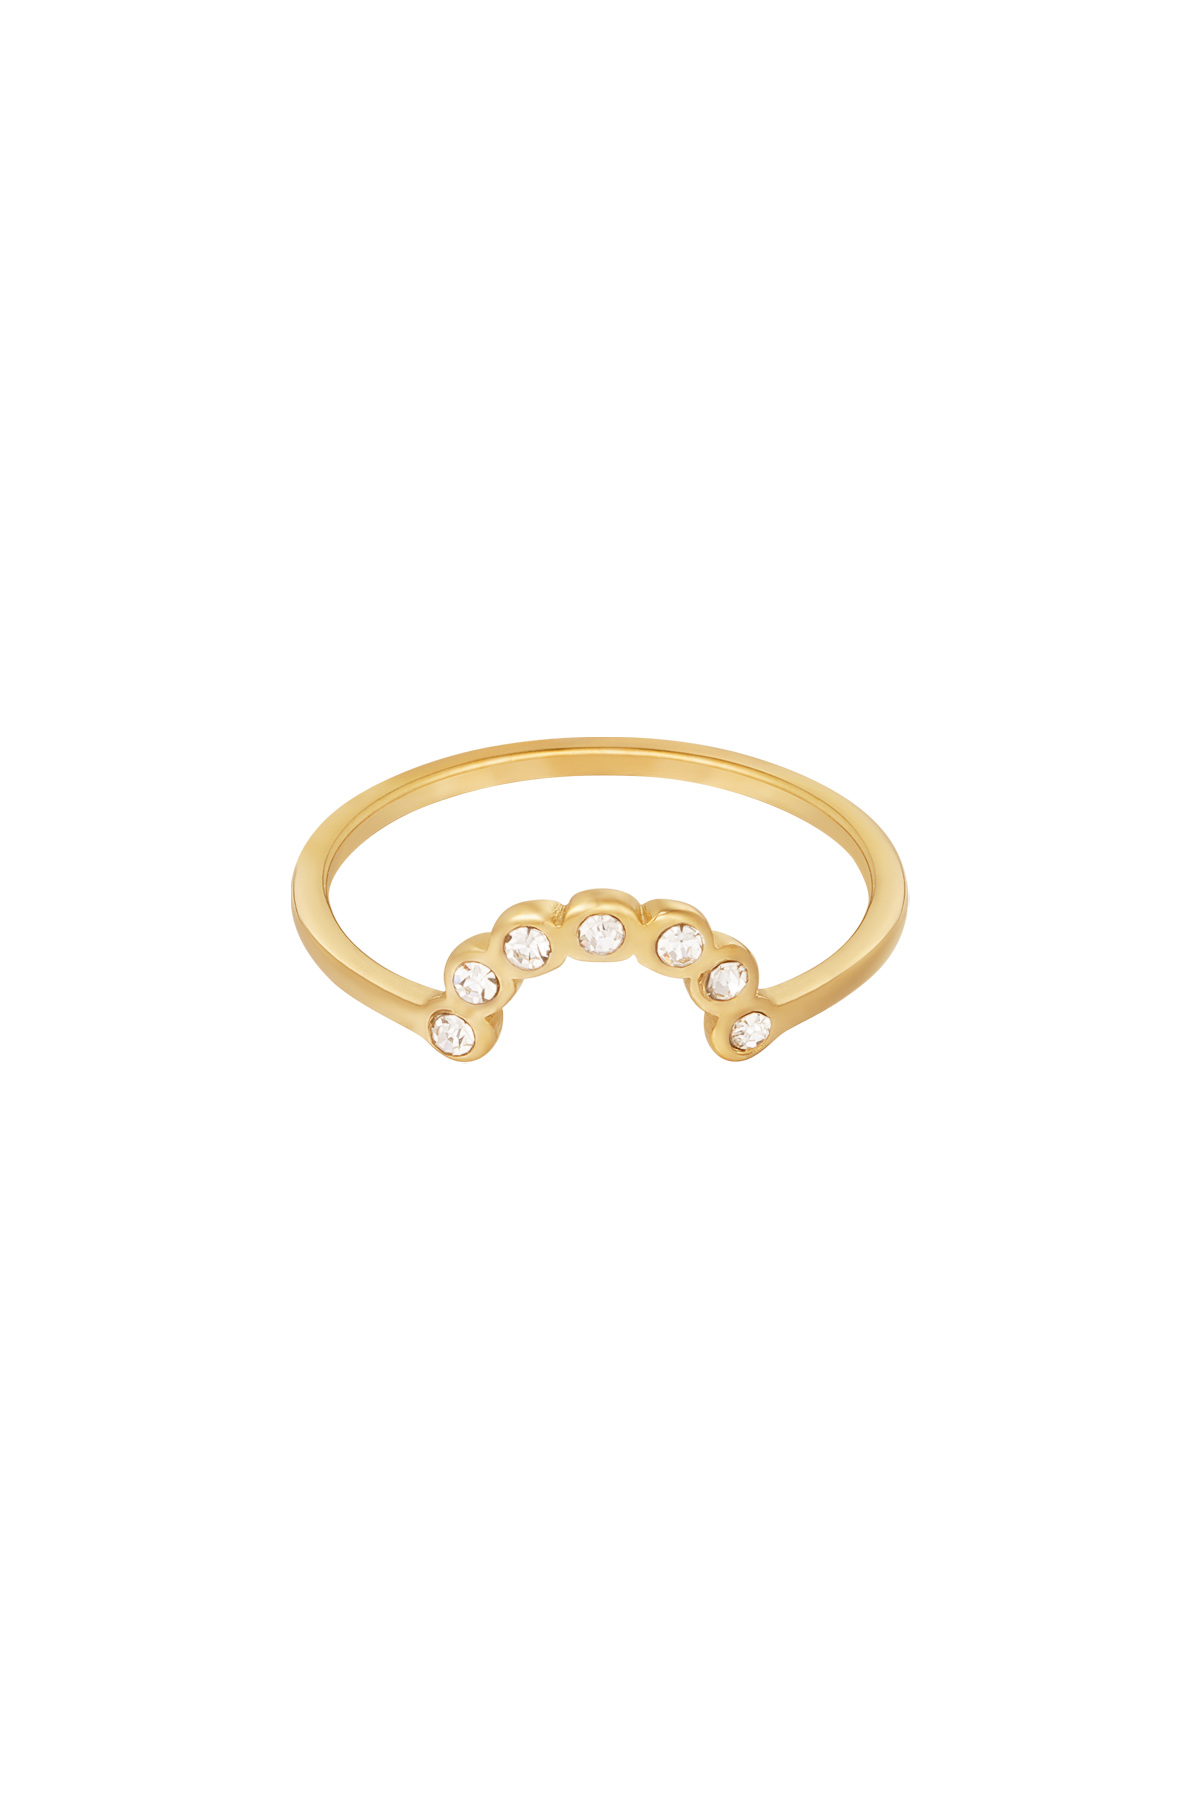 Ring moon with stones - gold 